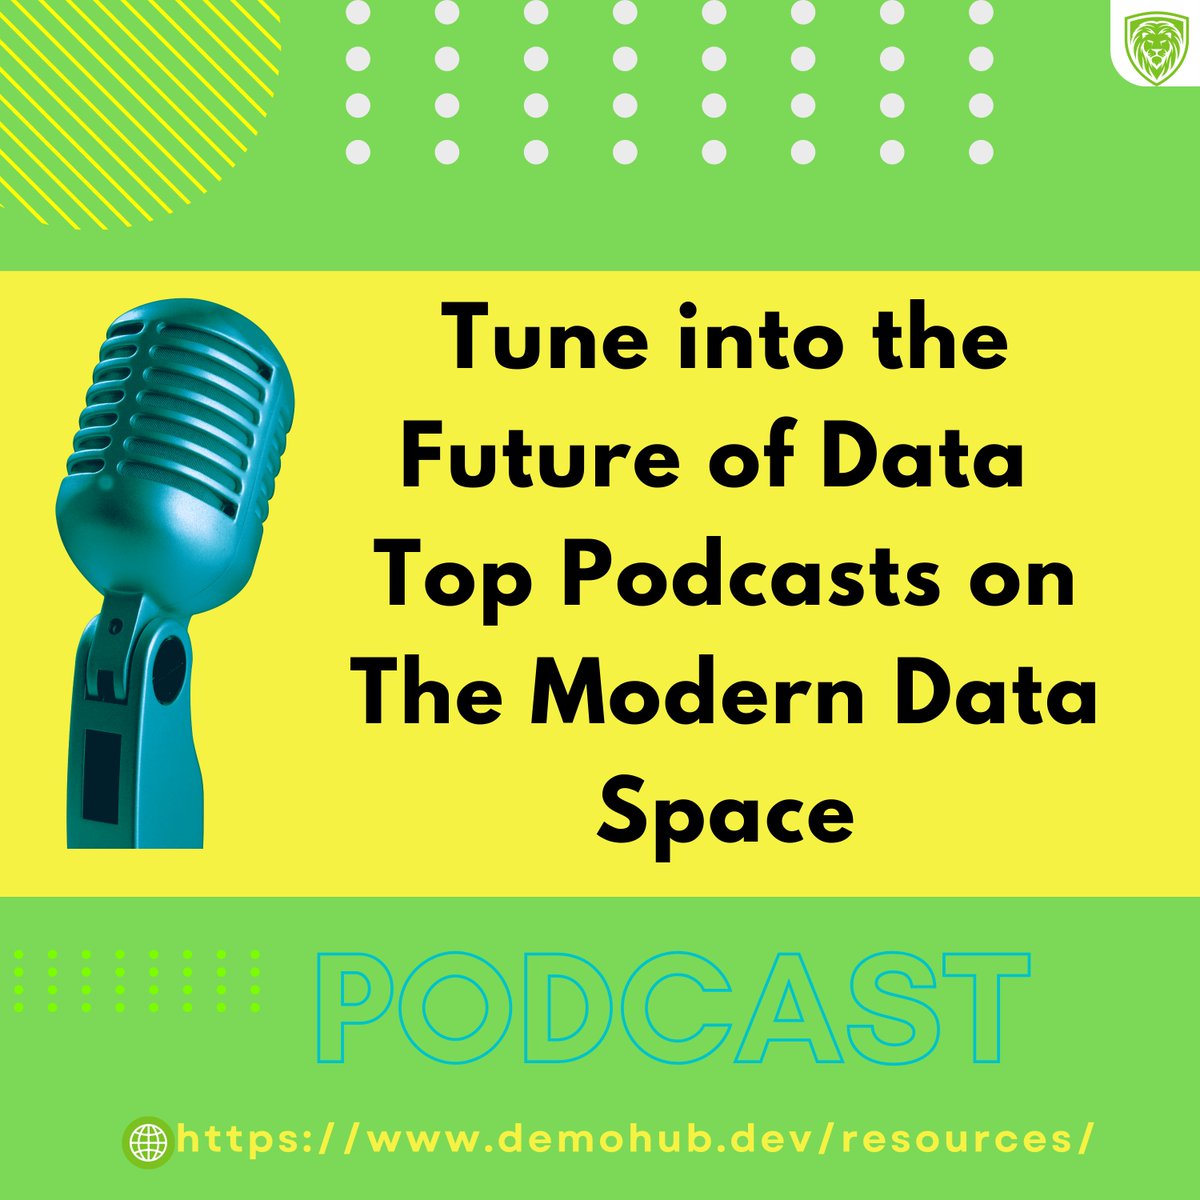 🎙️Tune into the Future of Data: Top Podcasts on The Modern Data Space
demohub.dev/podcast/

 #FutureOfData #DataPodcasts #DemoHub #ModernDataSpace #DataTrends #DataInsights #DataAnalytics #AIinData #StayAheadOfTheGame